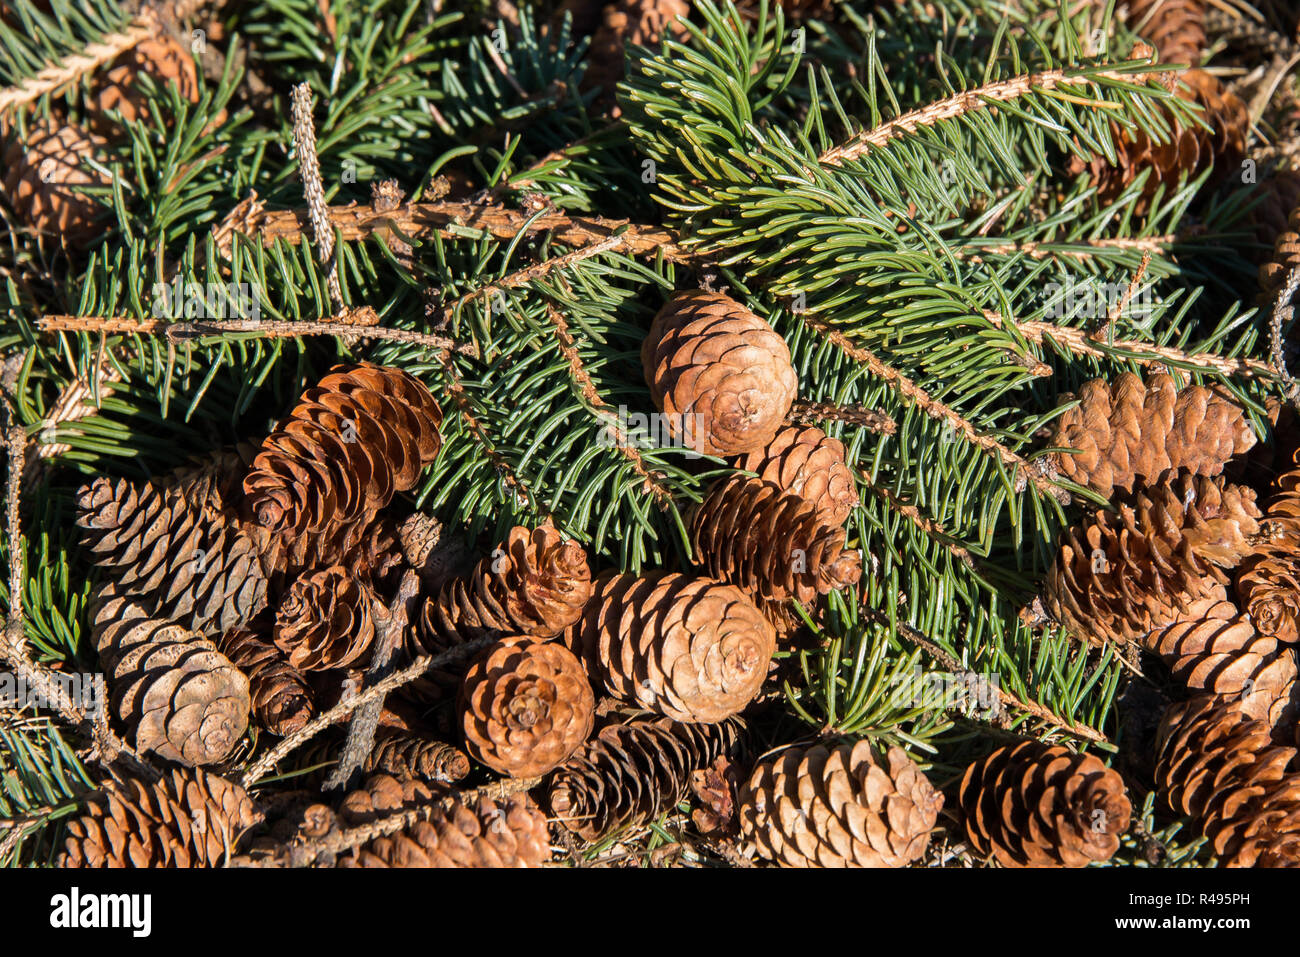 A pile of pine cones and branches fallen on the forest floor Stock ...